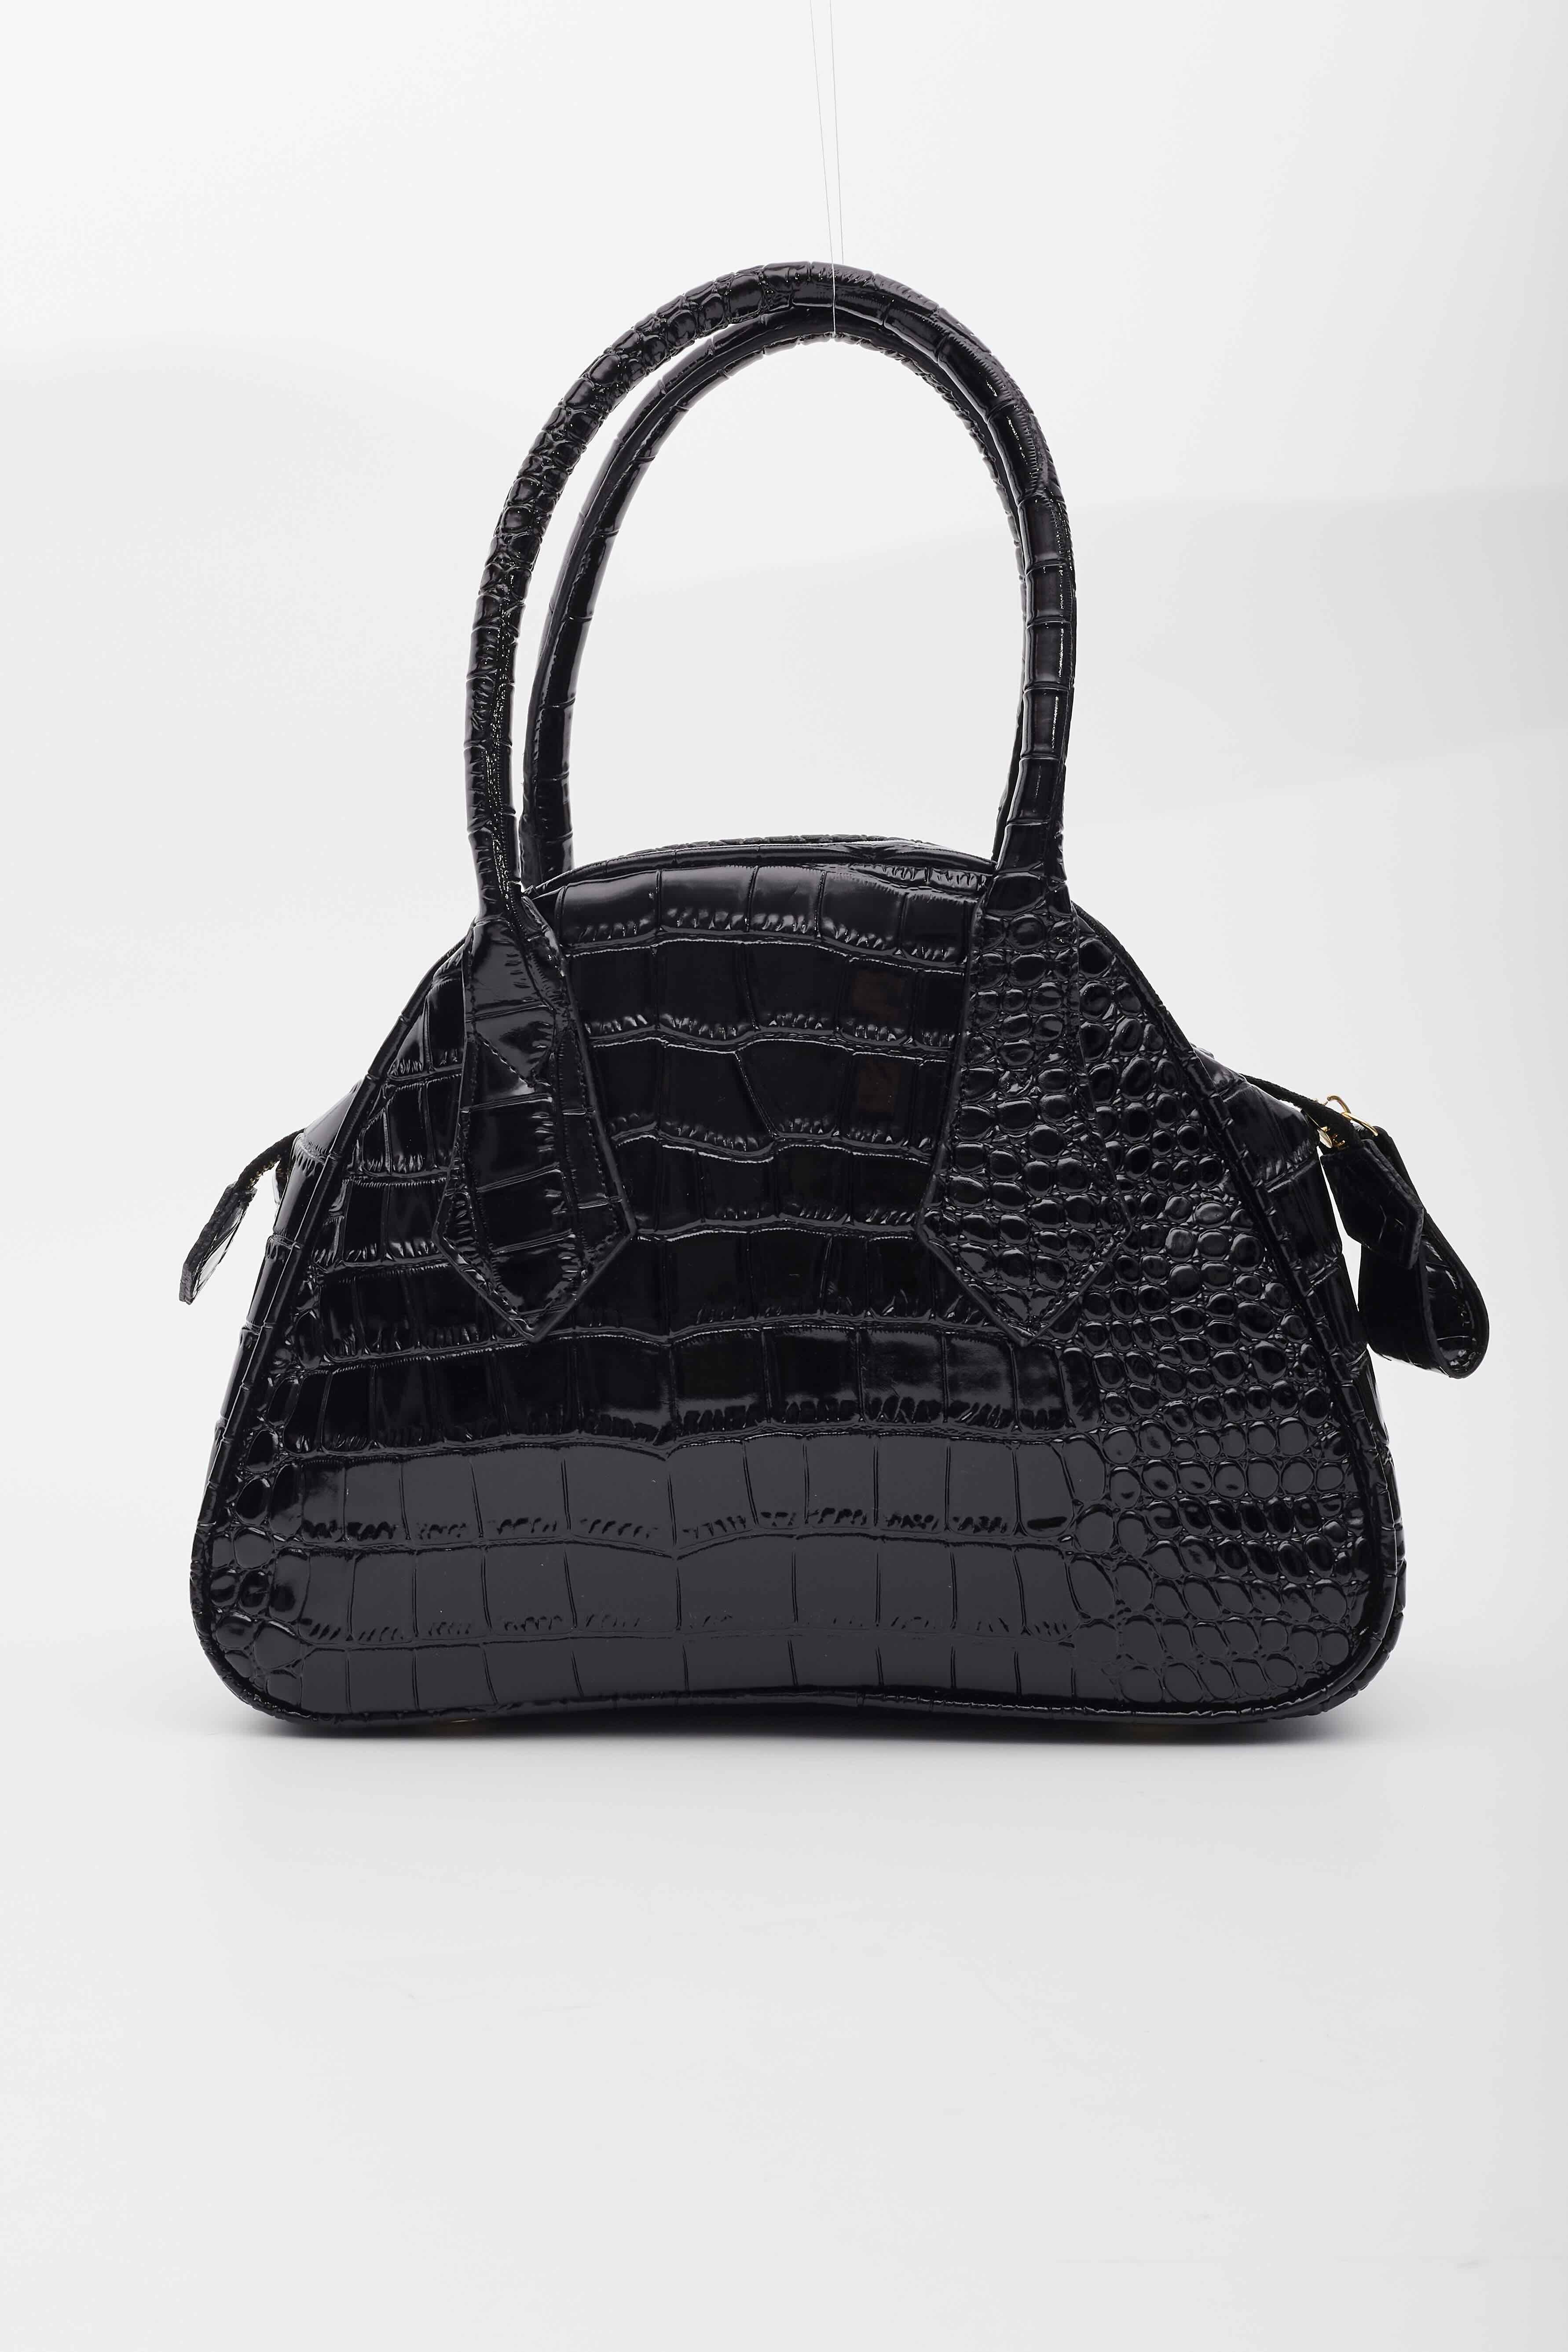 This bag features croc embossed faux leather, dual top handles, top zip closure with a large zipper tab, stripped cotton lining and a large orb on the front.

Color: Black
Material: Crock embossed vegan leather
Measures: Height 9” x Length 11” x